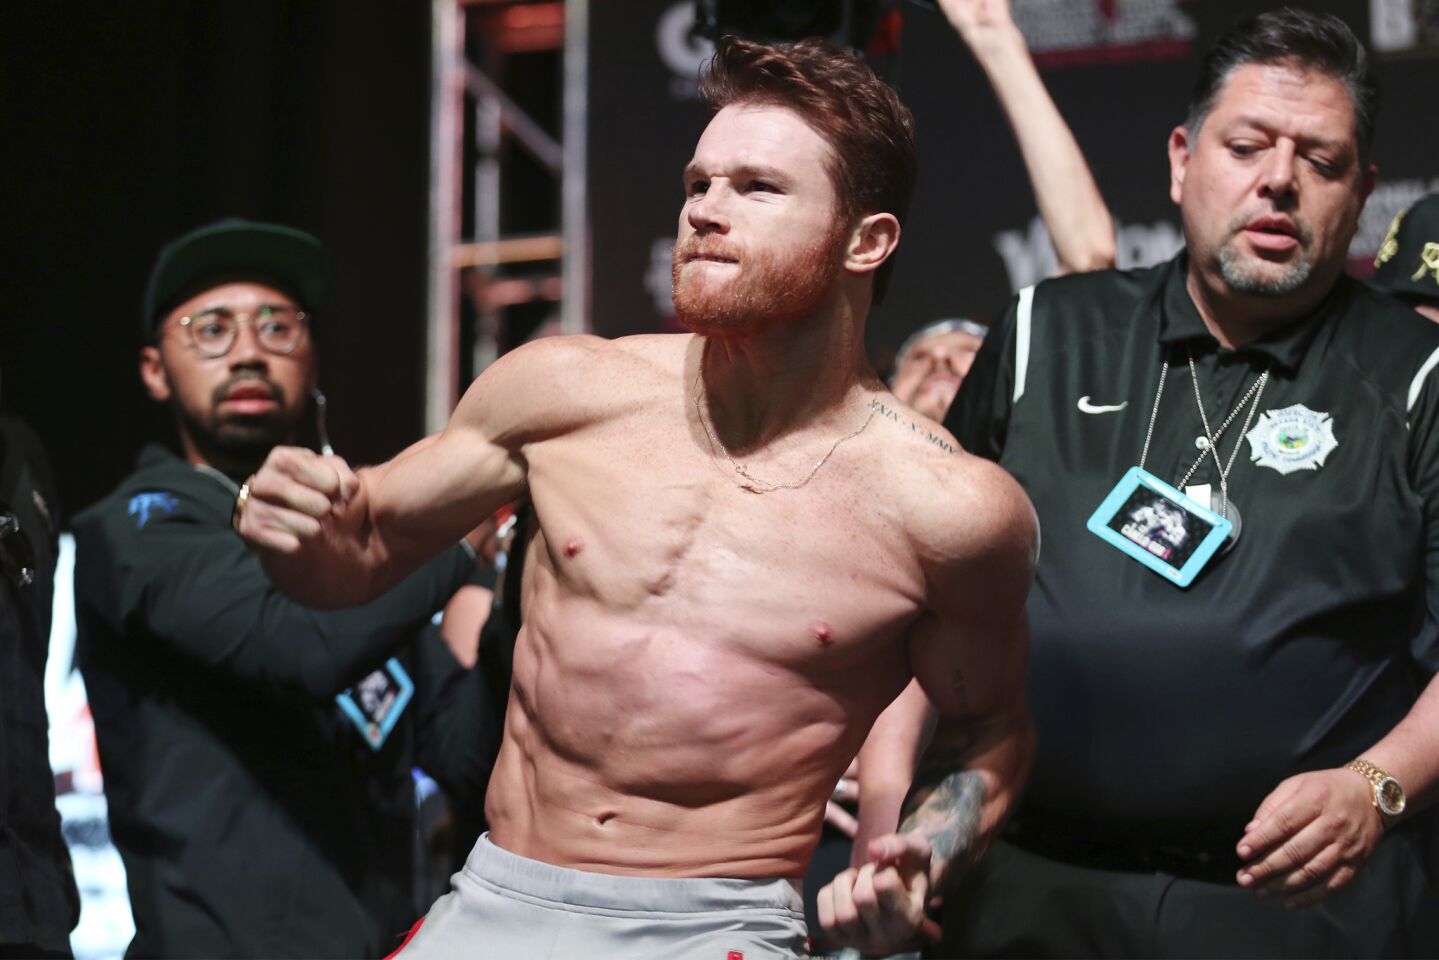 Canelo Alvarez poses during a weigh-in at T-Mobile Arena in Las Vegas, Friday, Sept. 14, 2018. Alvarez will fight Gennady Golovkin on Saturday in a middleweight title bout. (Erik Verduzco/Las Vegas Review-Journal via AP)